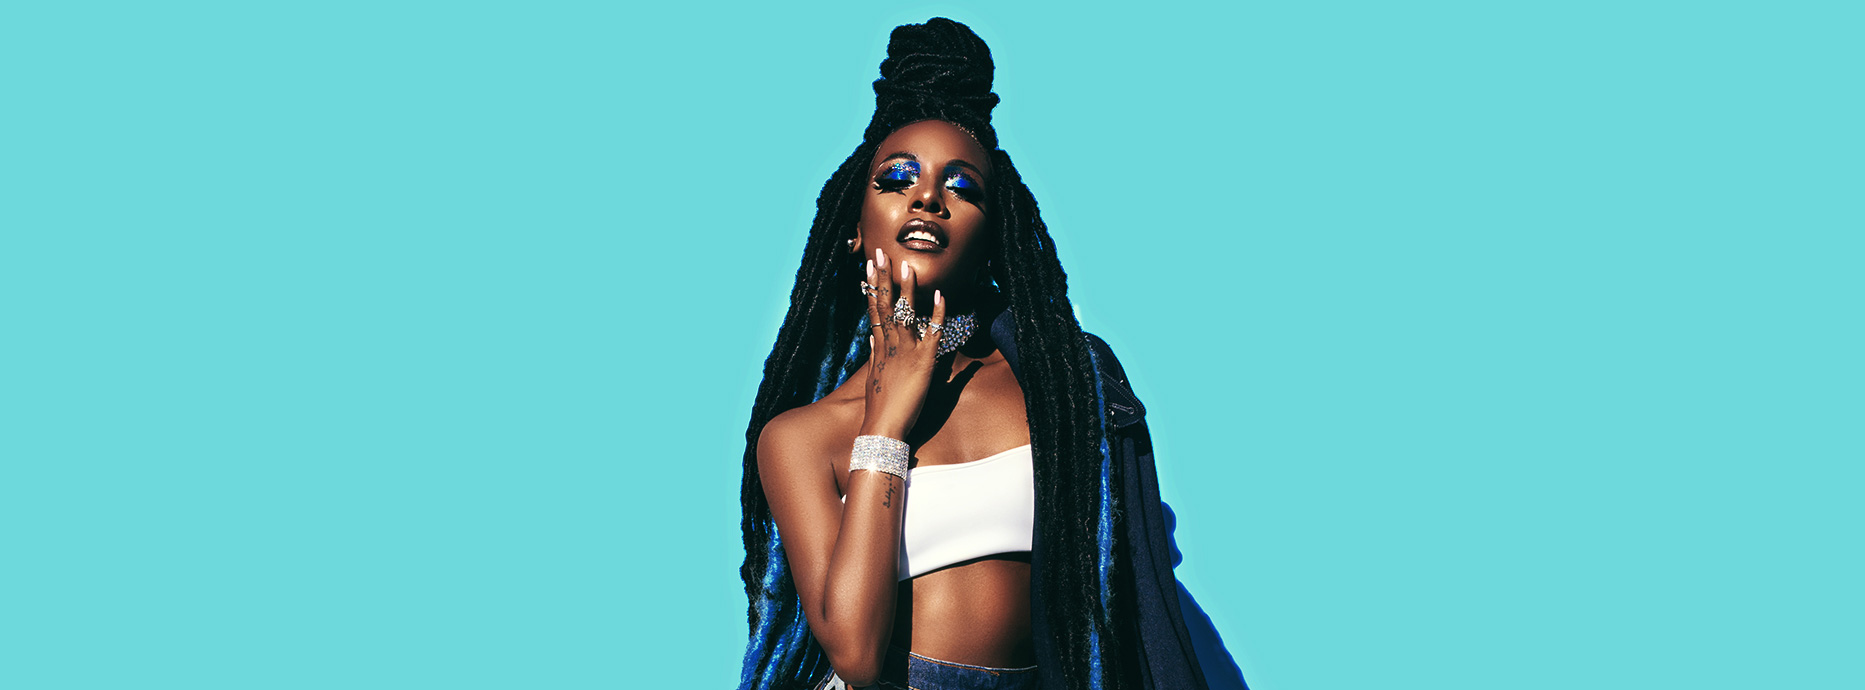 D∆WN Ready to Make History With YouTube 360 Performance